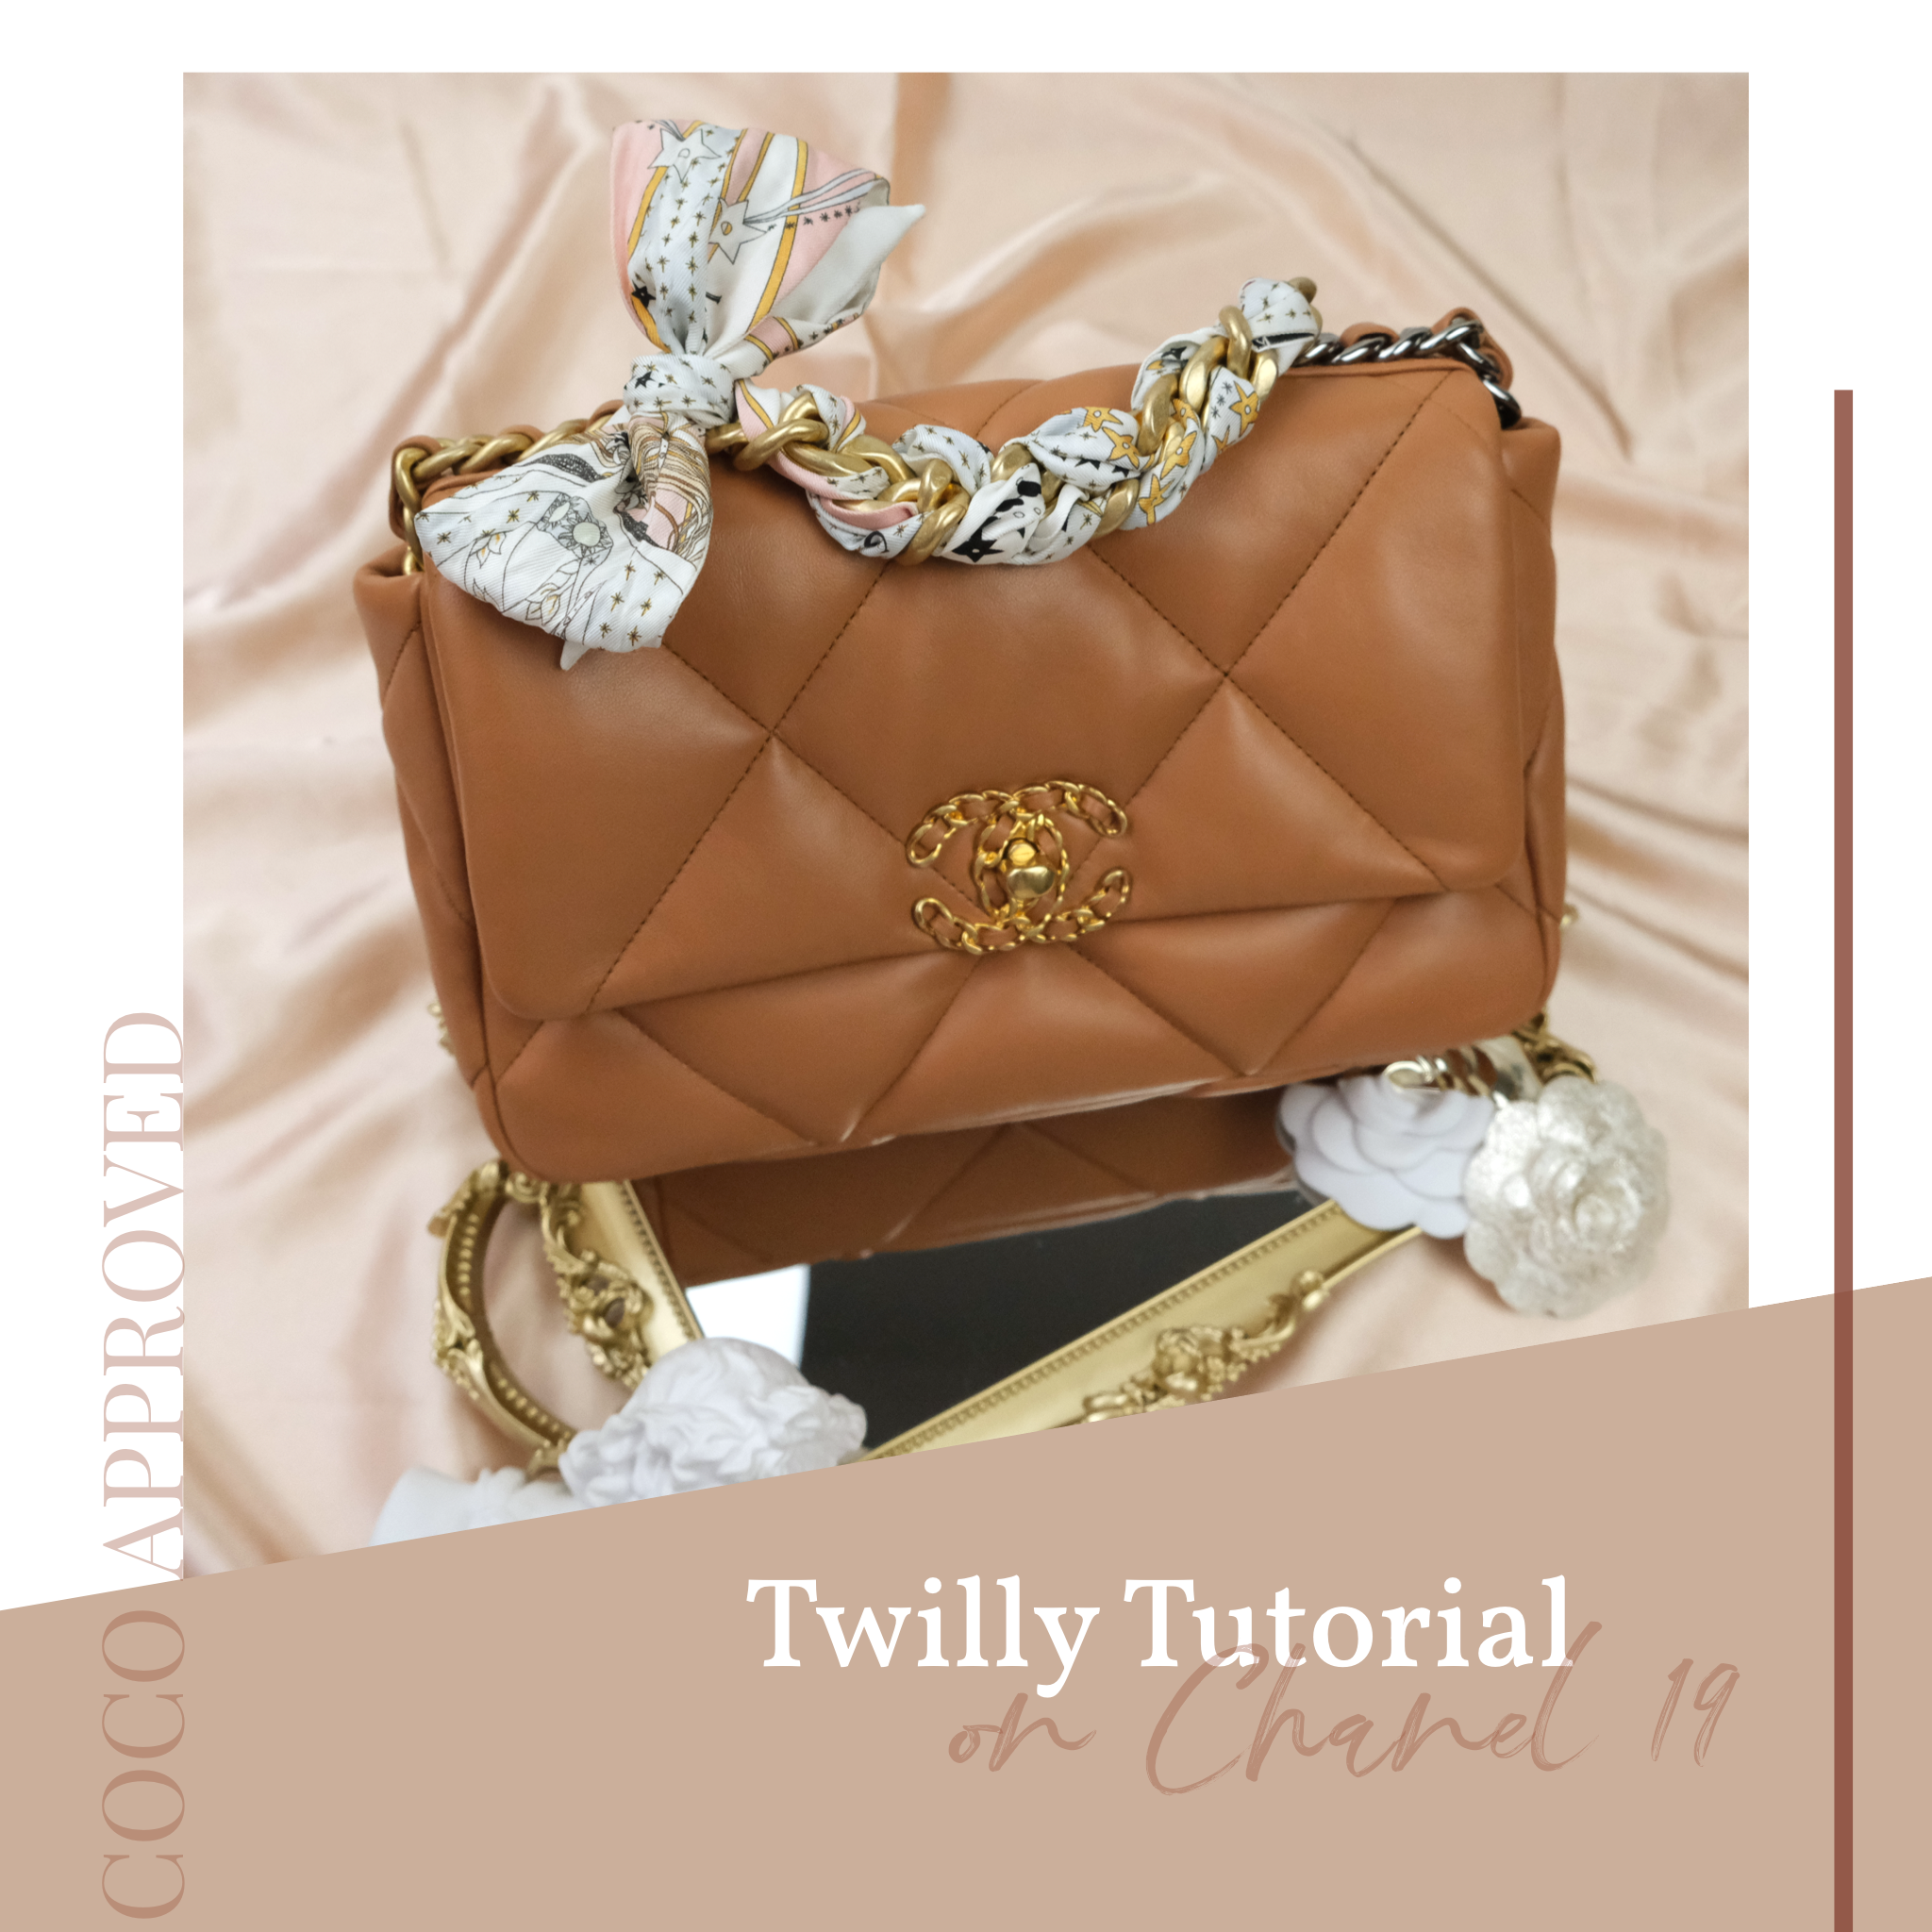 How To Tie Twilly Scarf On a Bag Handle 